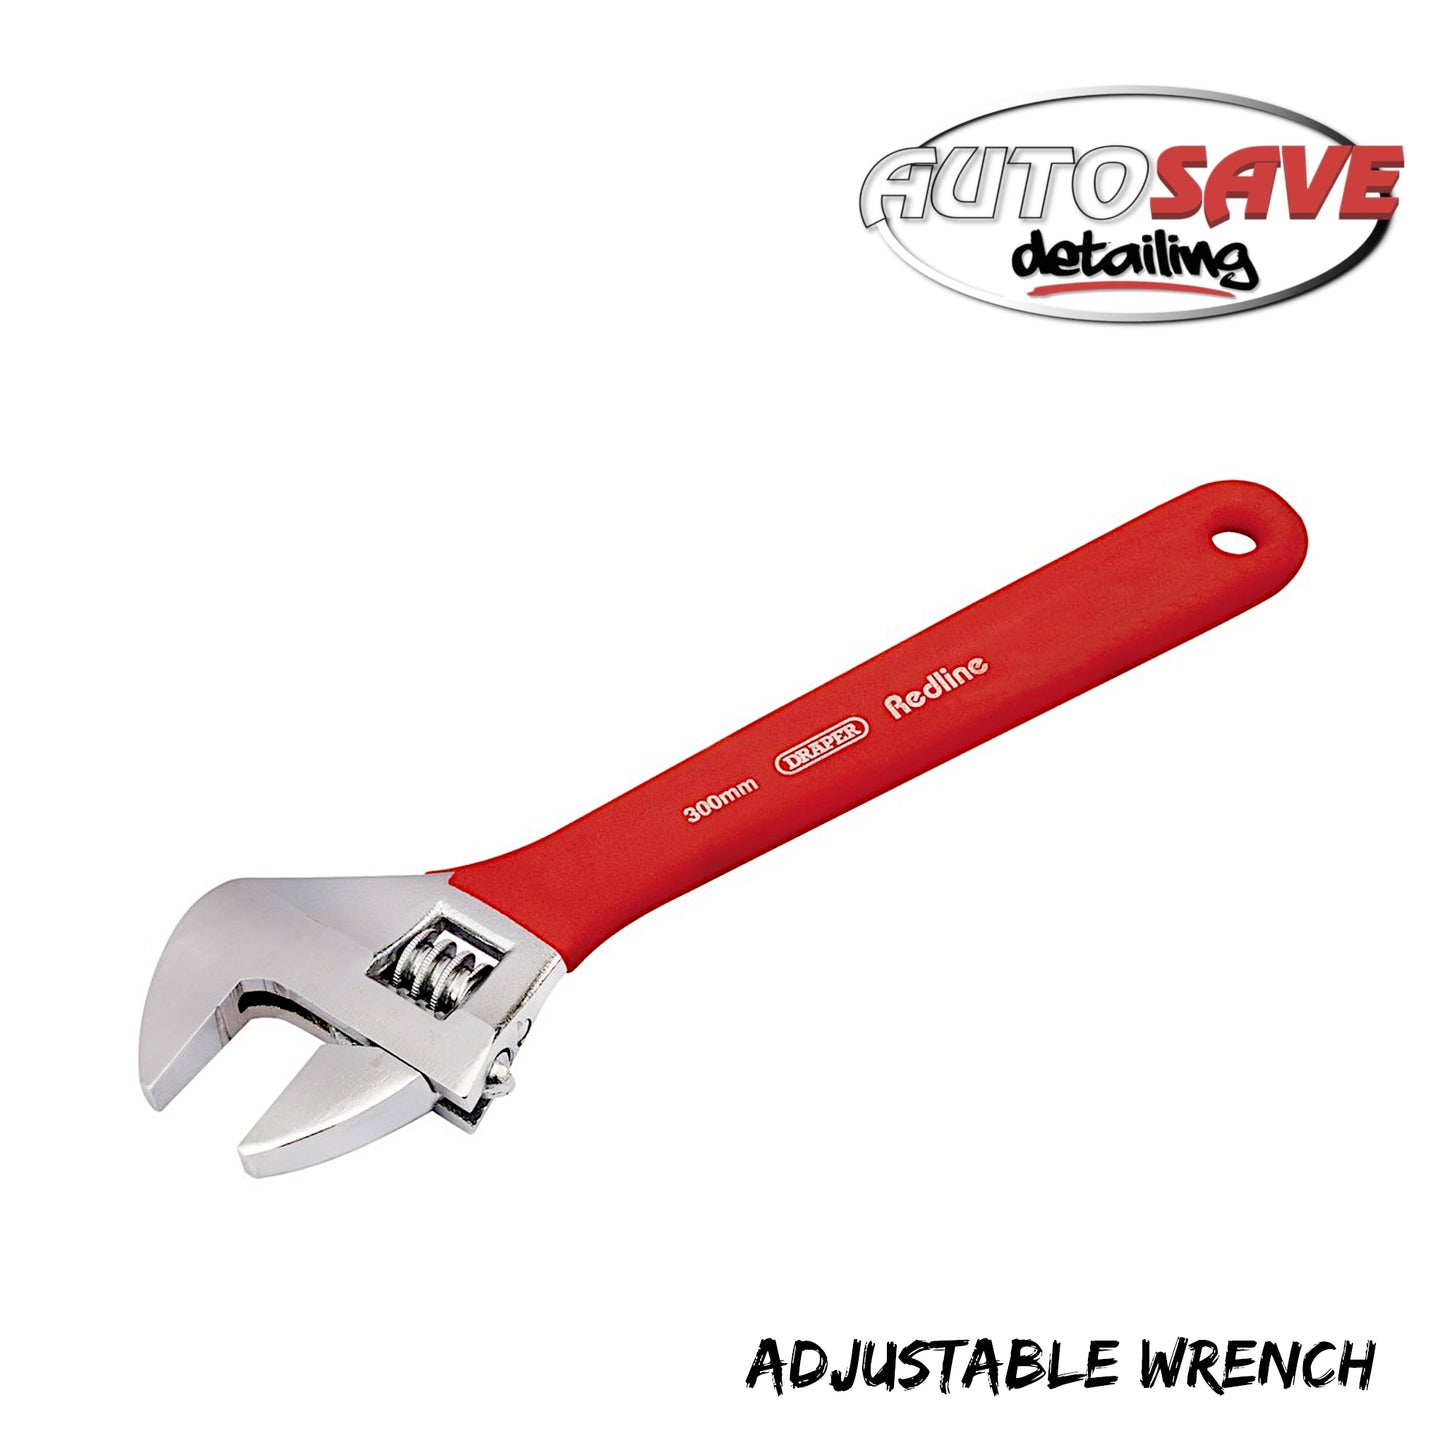 Soft Grip Adjustable Wrench, 300mm, 37mm Capacity (67633)